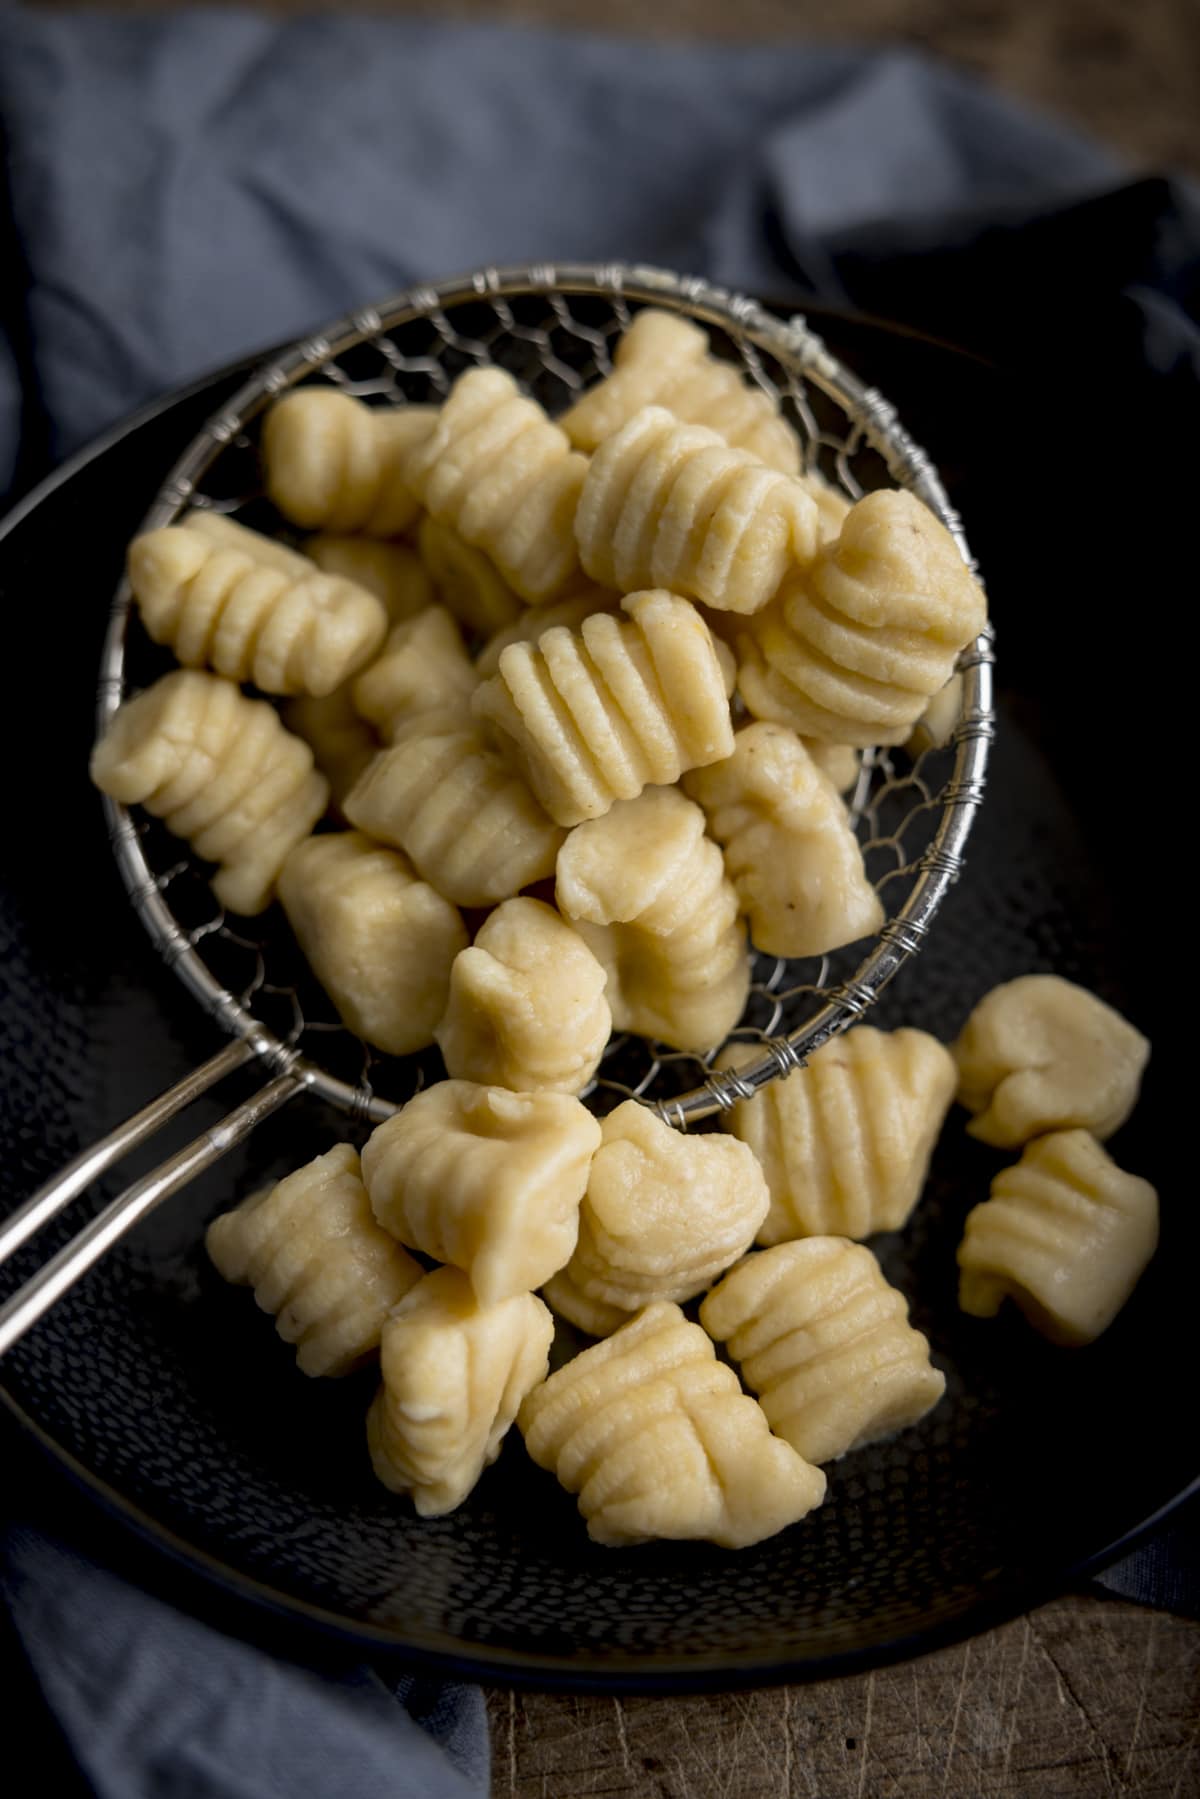 Homemade gnocchi in a slotted spoon, being added to a dark bowl. There is a blue napkin surrounding the bowl.